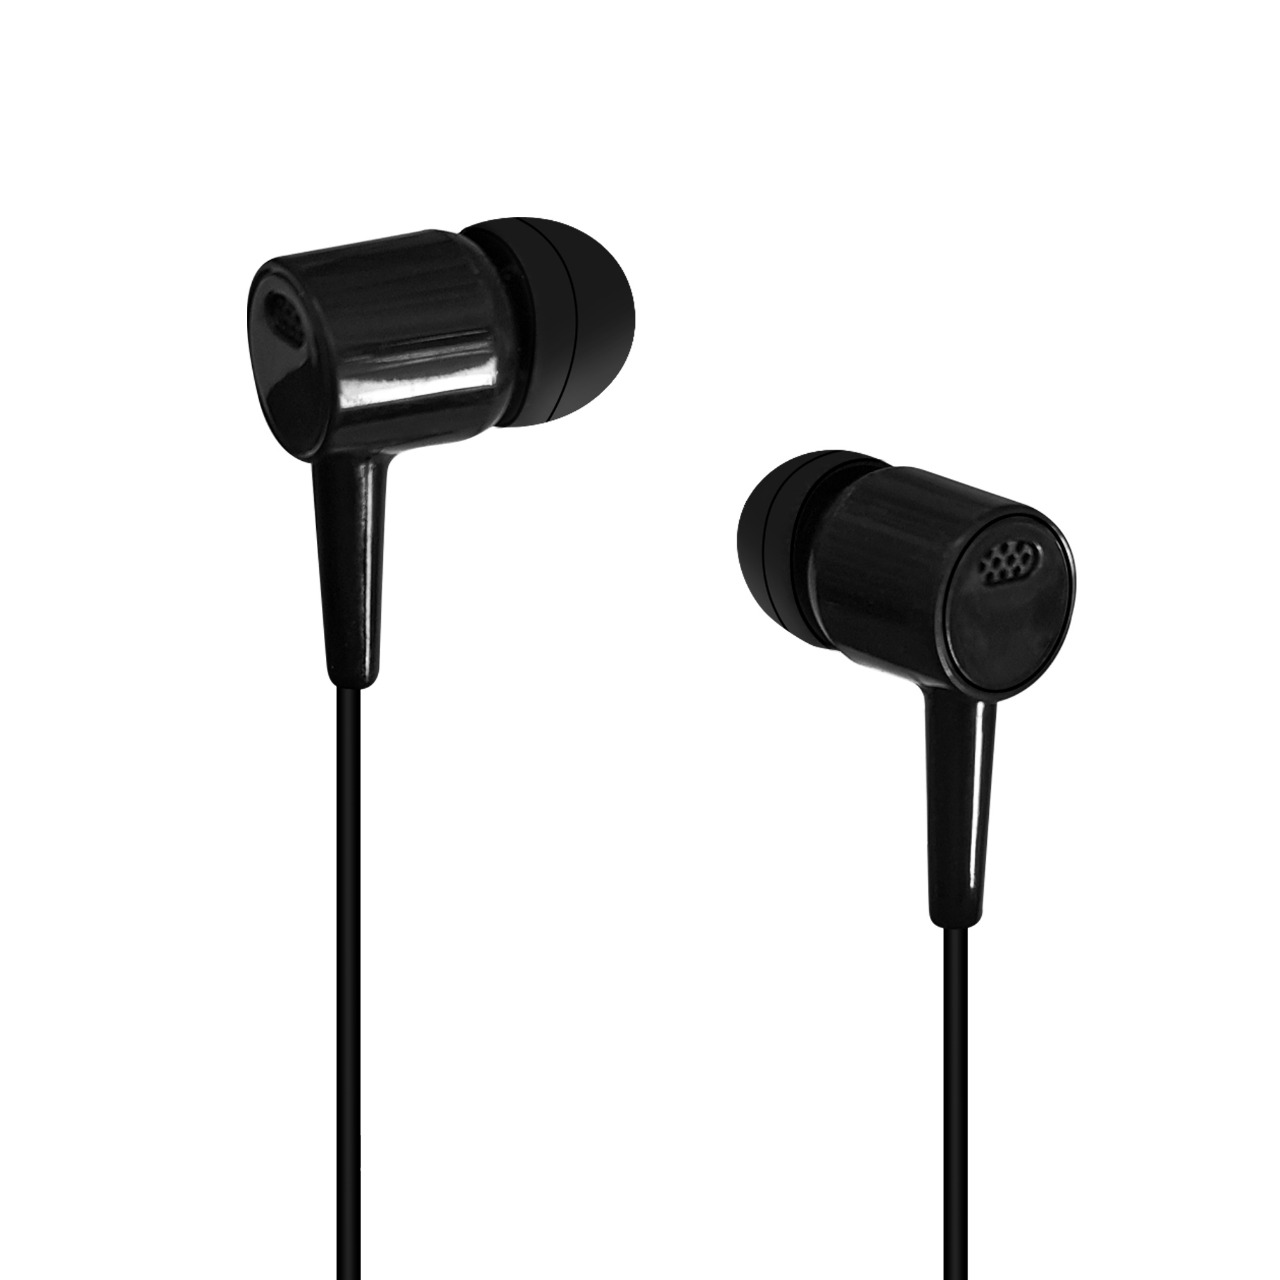 Signature Black VM 70 In Ear wired Headphone Headset with Mic